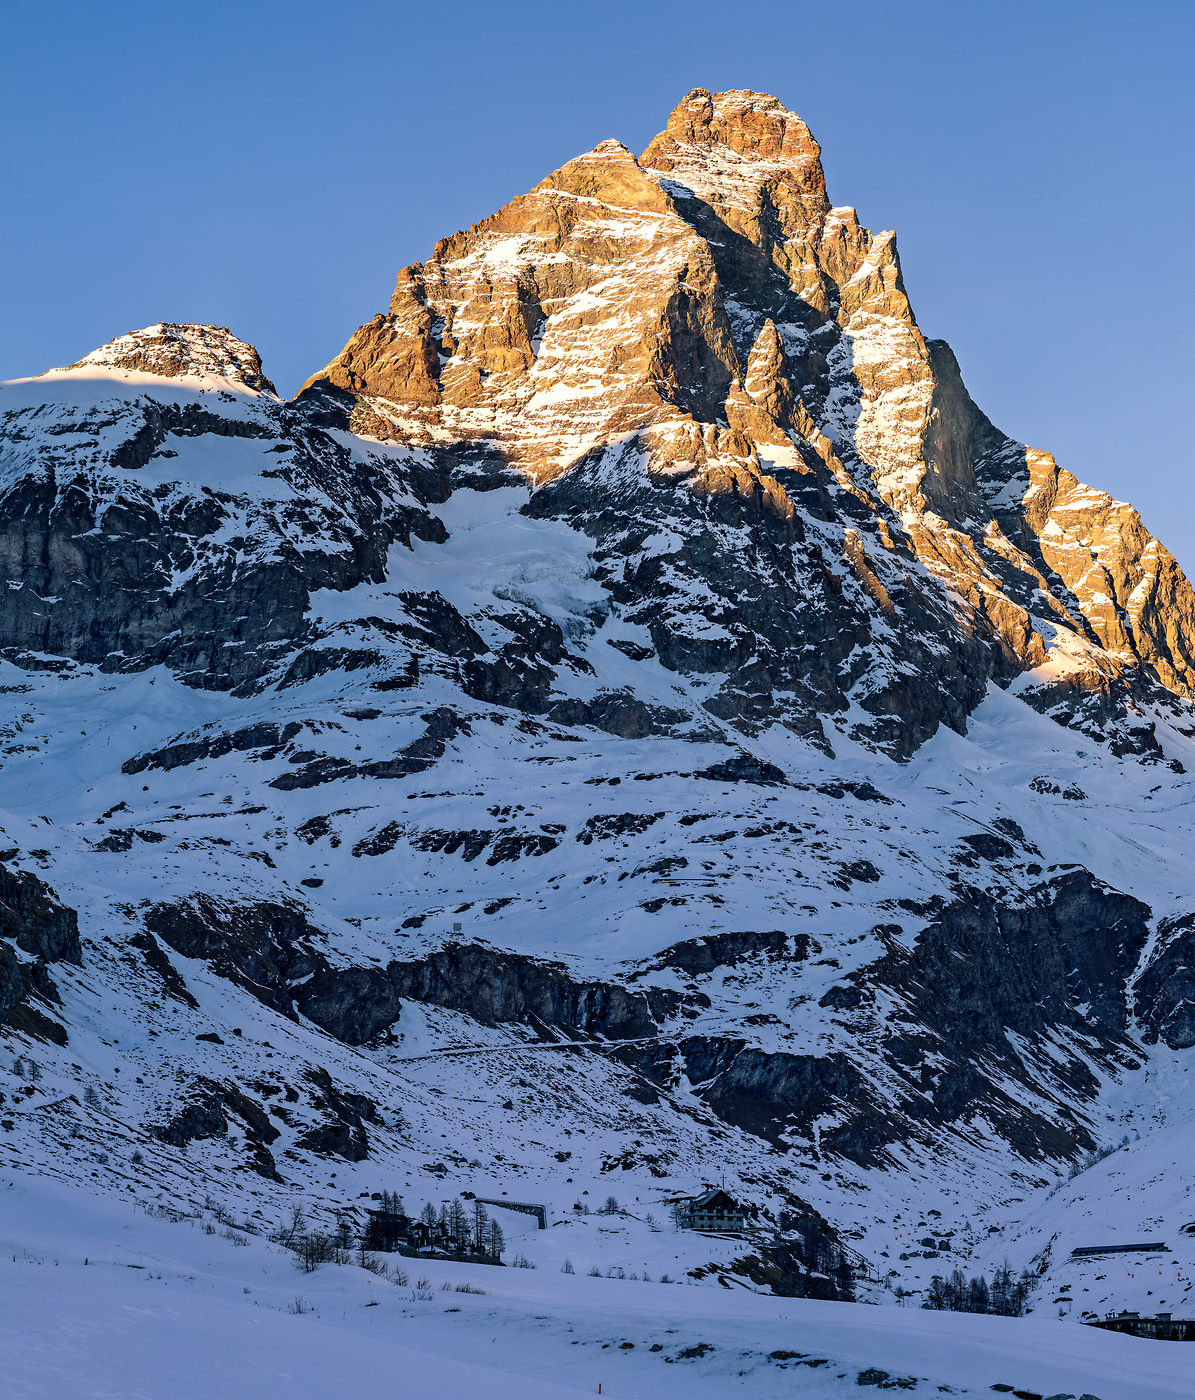 671 megapixels! A very high resolution, large-format VAST photo print of the Matterhorn; photograph created by Duilio Fiorille in Breuil Cervinia, Valtournenche, Valle d'Aosta, Italy